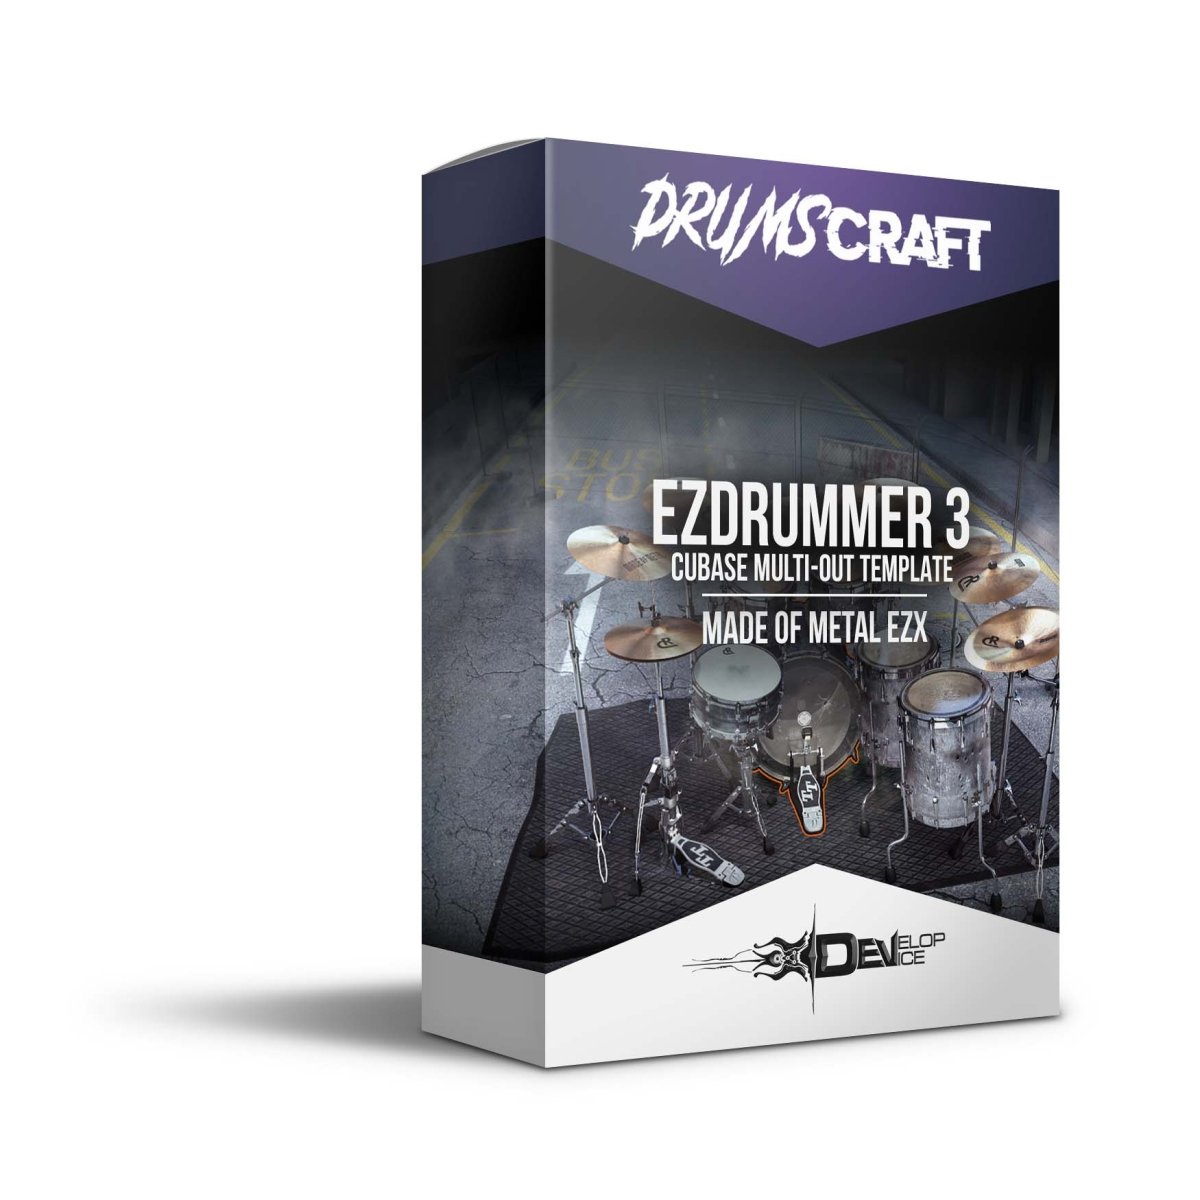 EZDrummer 3 | Cubase Multi-Out Template | Made of Metal EZX - EZdrummer 3 Templates by Develop Device